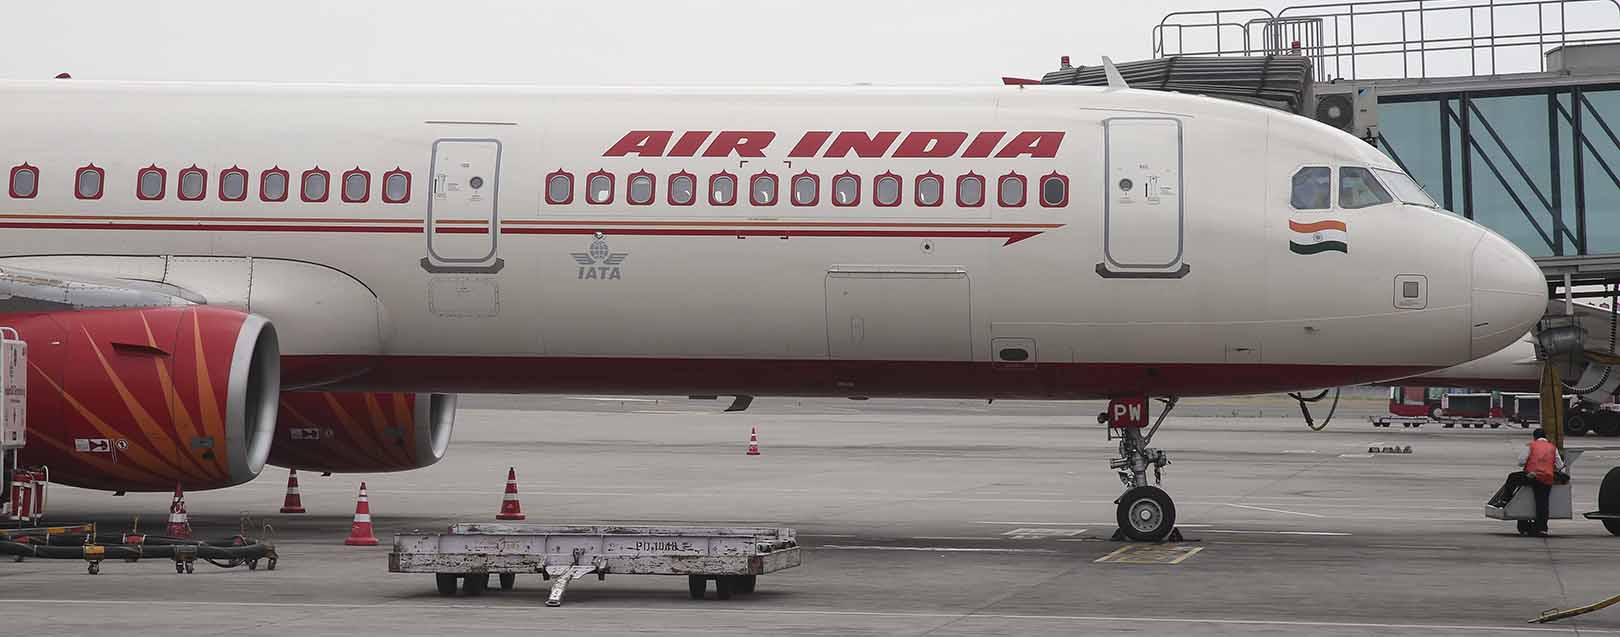 AI to buy more wide-body planes to expand global network